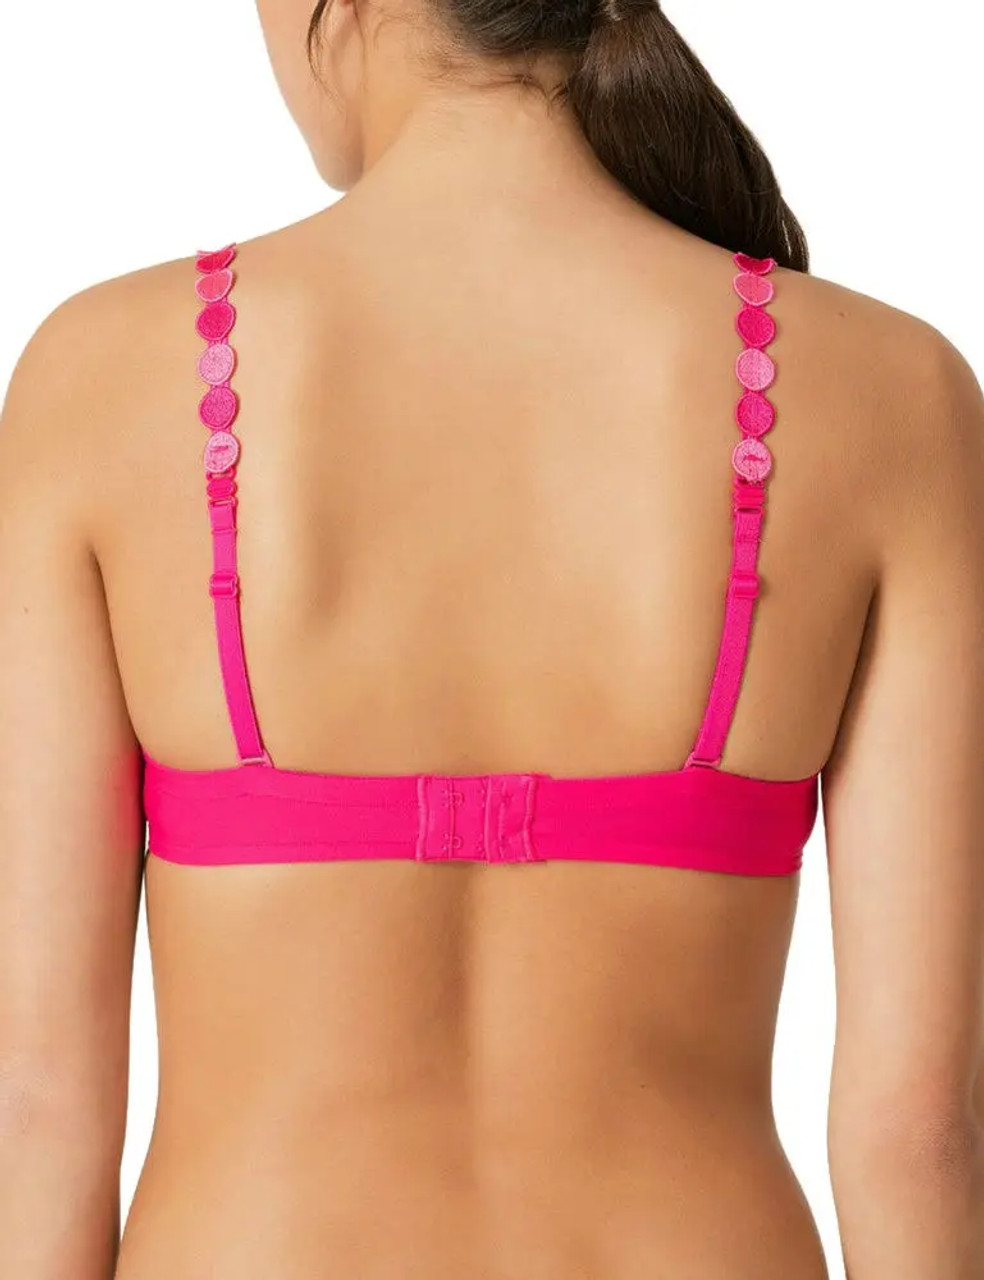 Marie Jo Tom Push Up Bra in Electric Pink FINAL SALE (40% Off) - Busted Bra  Shop